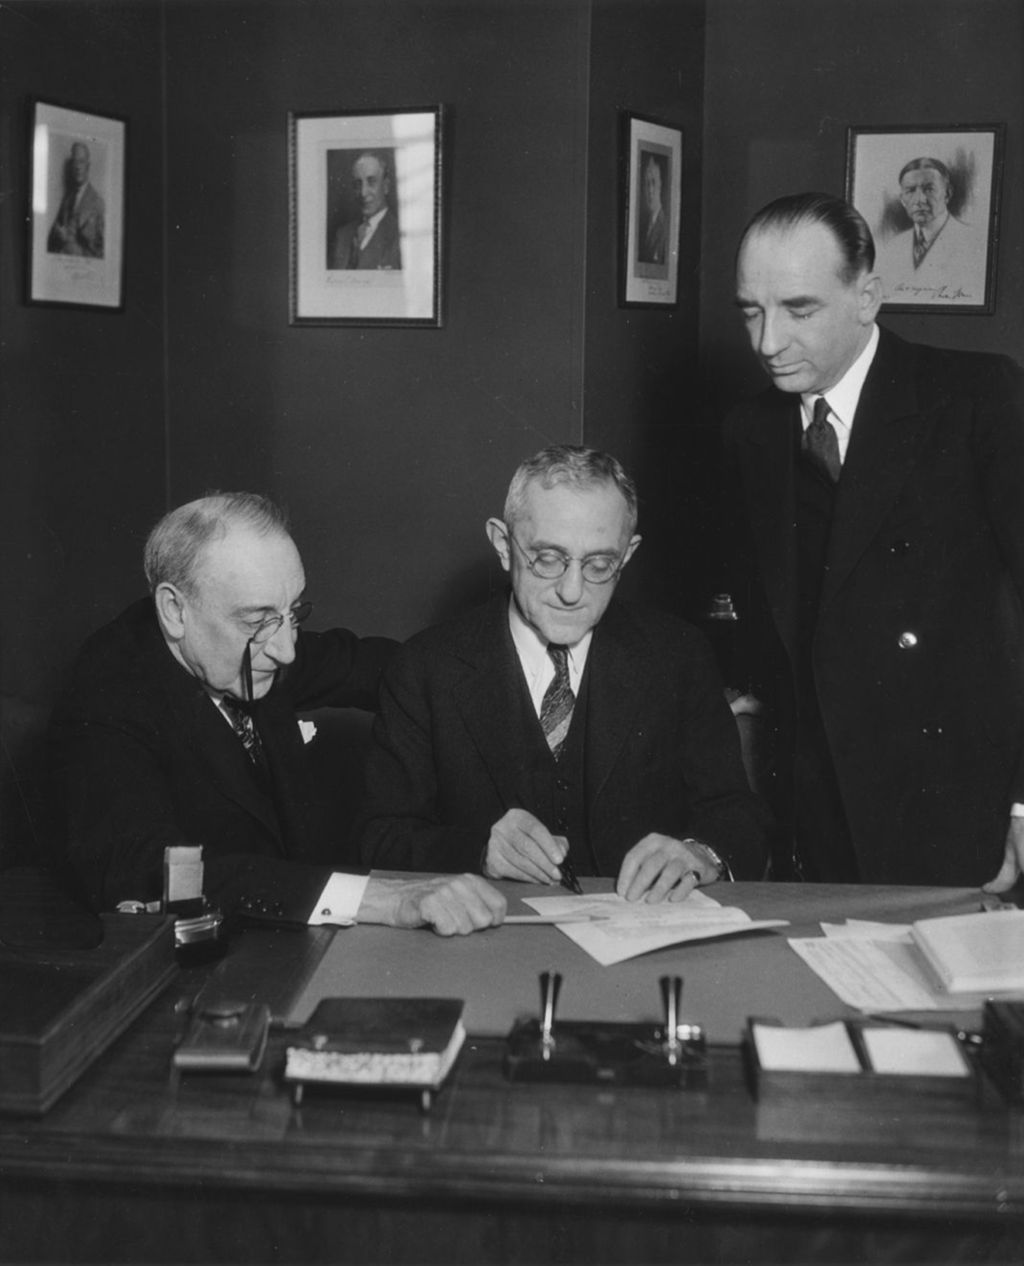 Miniature of Edward H. Sniffen, Asst. Vice-President of Westinghouse Electric and Manufacturing Company, signing contract for renewal of the company's exhibit